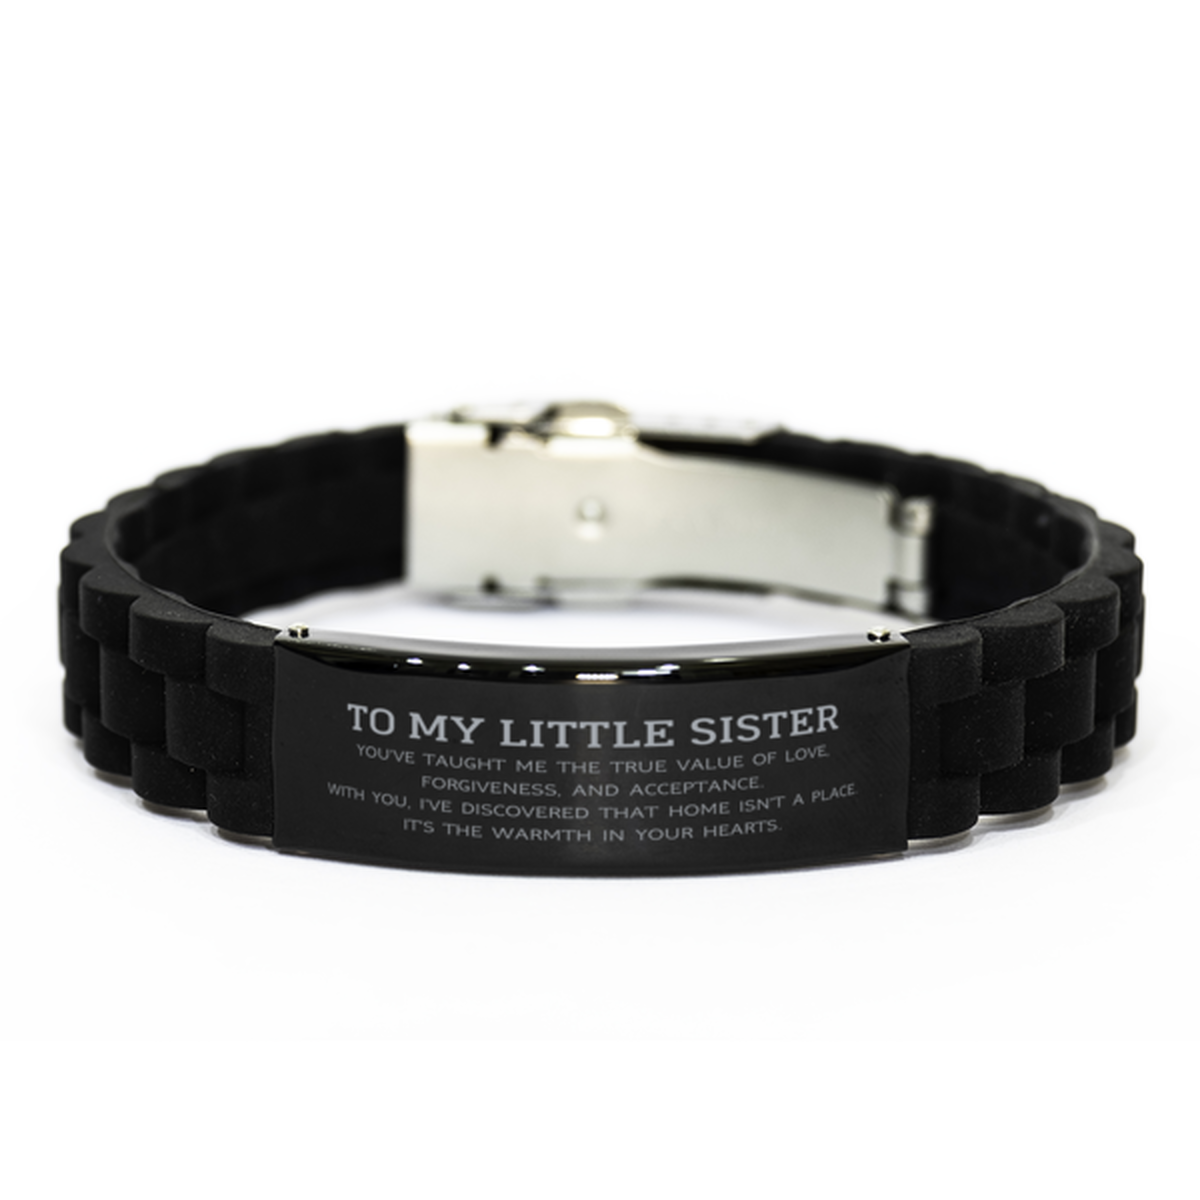 To My Little Sister Gifts, You've taught me the true value of love, Thank You Gifts For Little Sister, Birthday Black Glidelock Clasp Bracelet For Little Sister